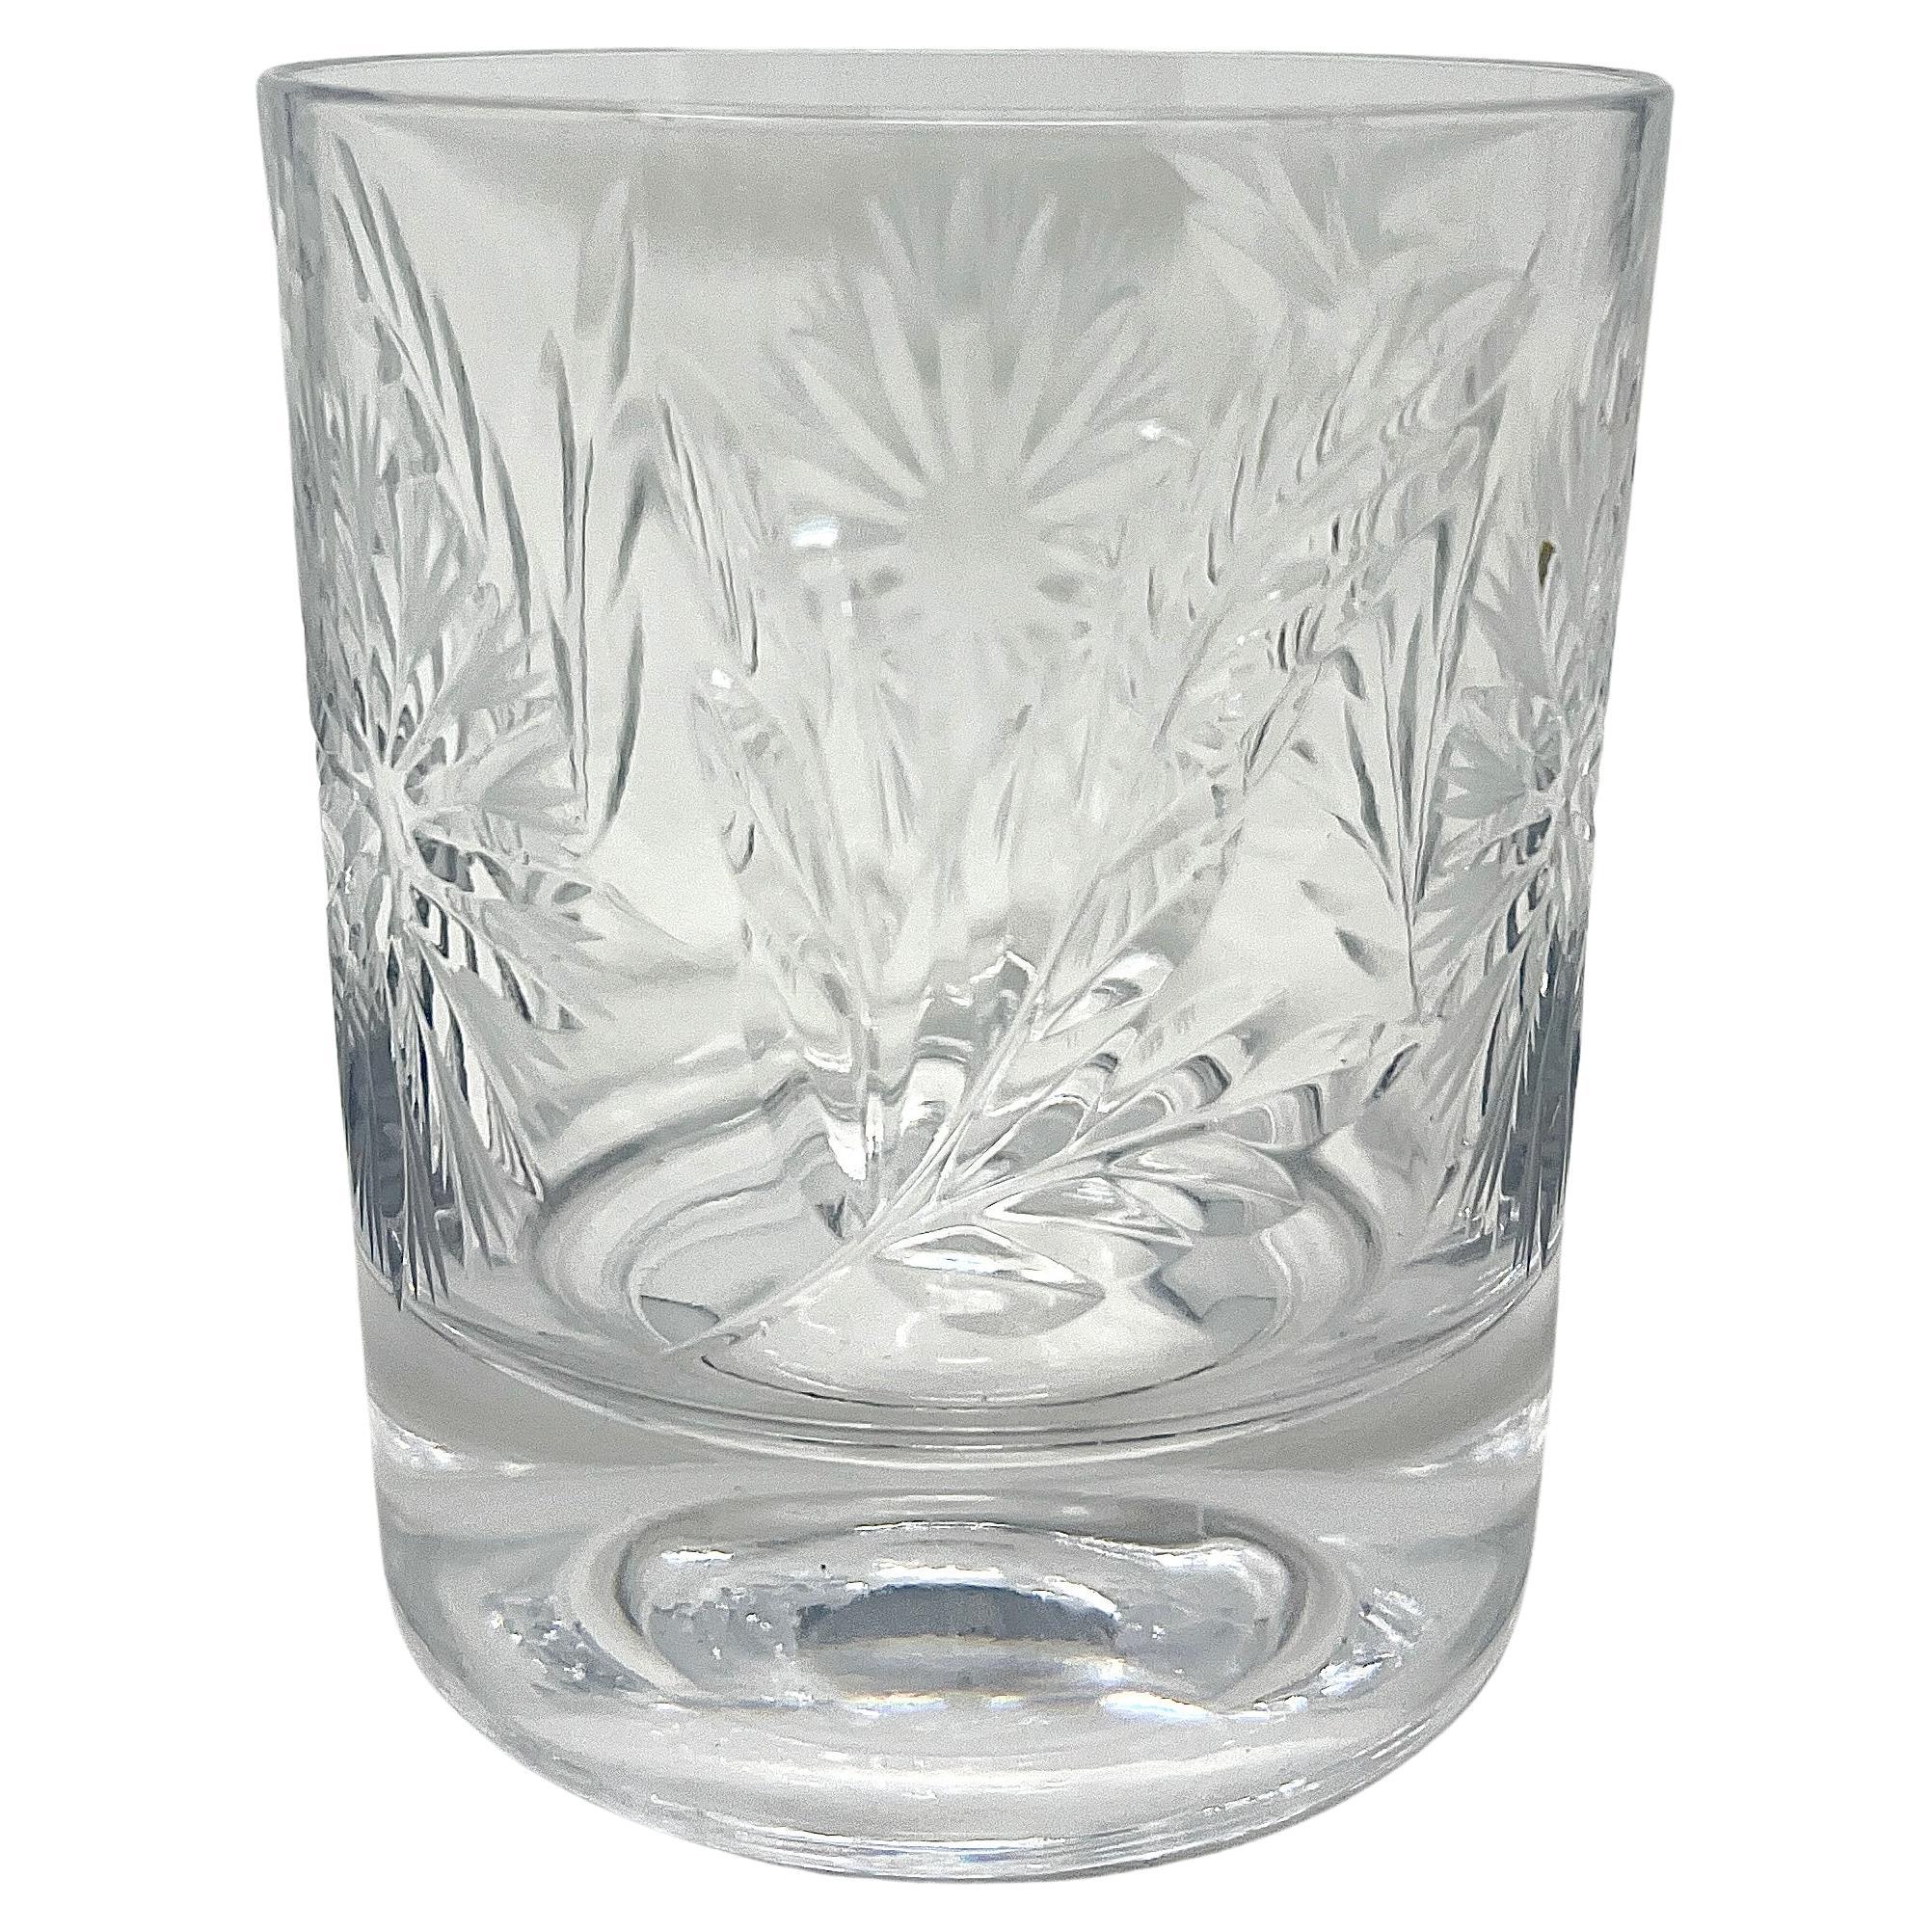 Set of 6 Estate American Cut Crystal Double Old Fashioned Glasses.
Per the last two photos, crystal wine decanters are also available and listed individually.